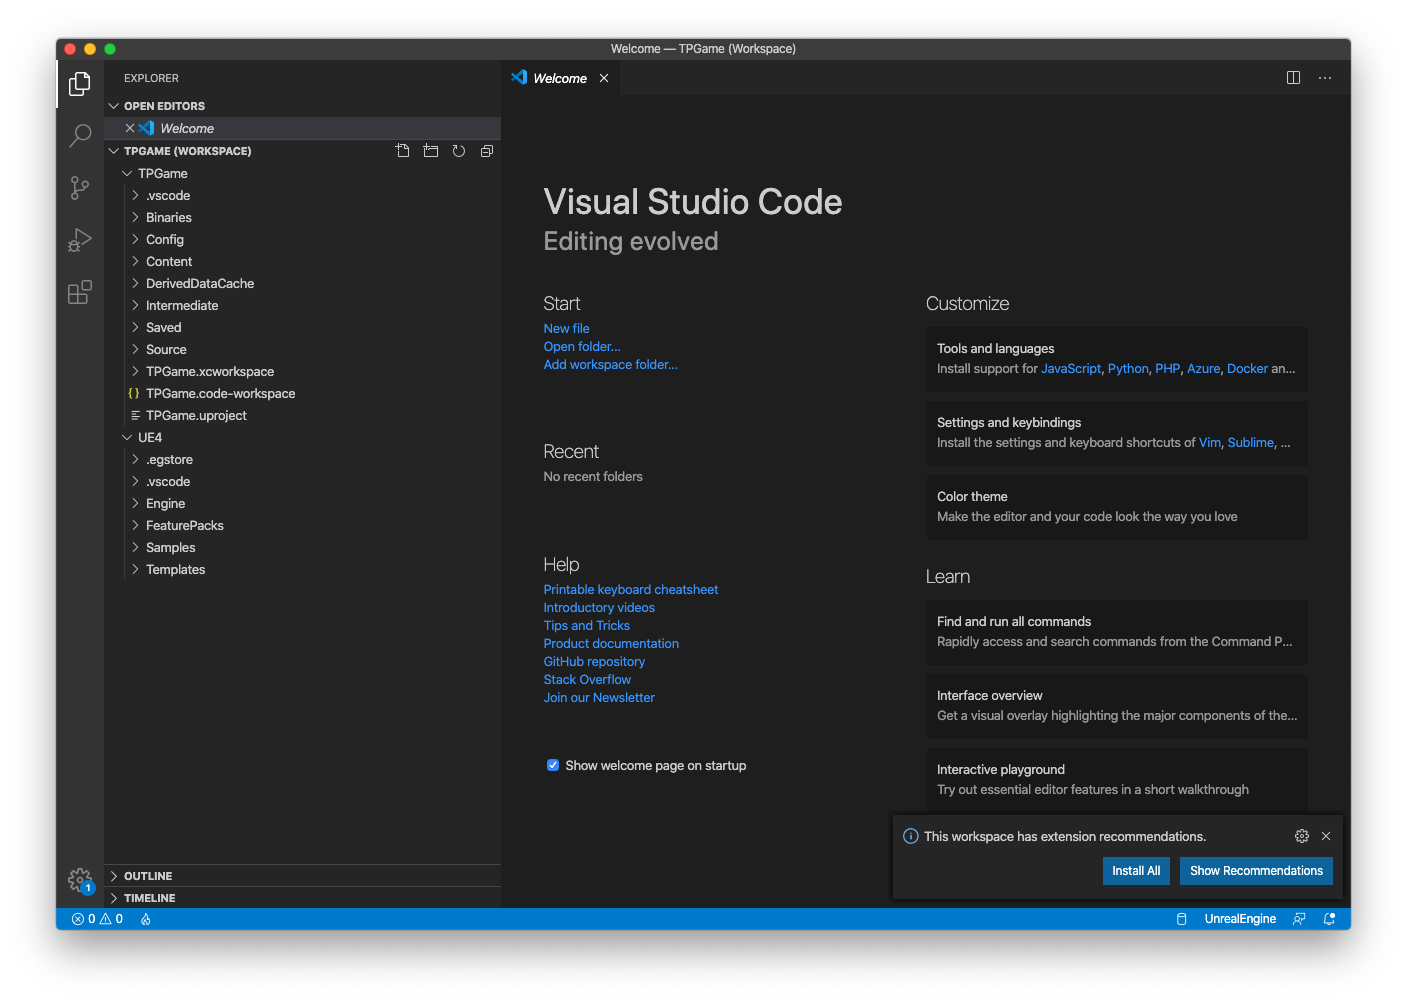 free xcode for mac 10.6.8